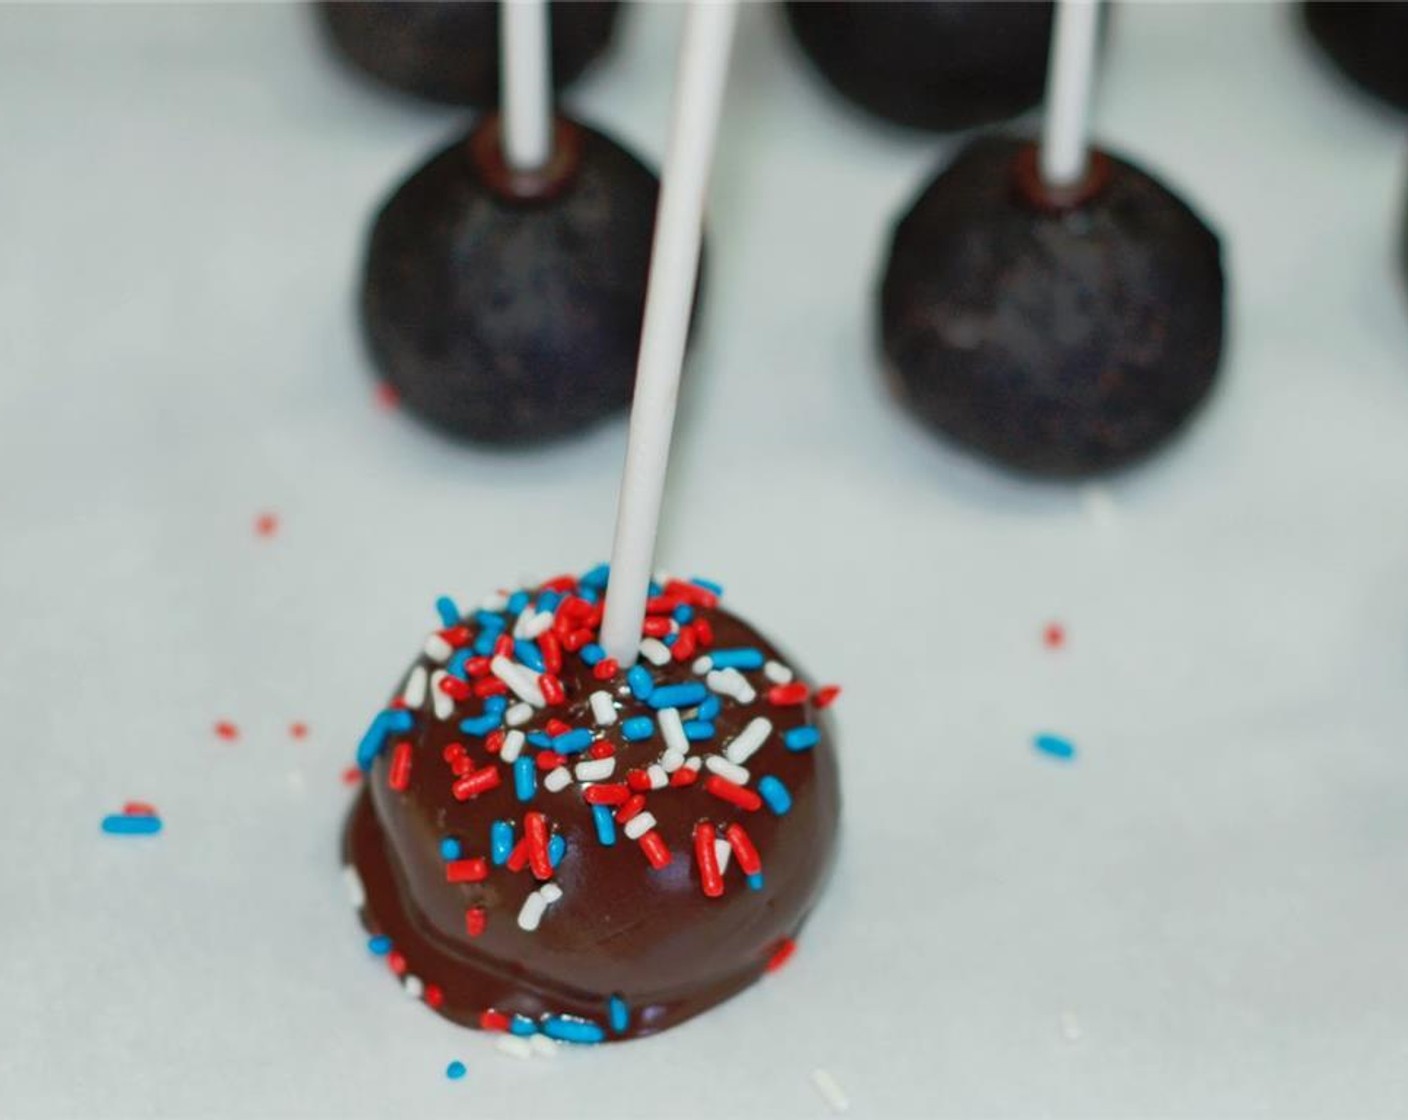 step 7 Then place pops on wax paper, stick facing upwards. Add some of the Red, White, and Blue Sprinkles (1/2 cup) before the candy melt hardens. Repeat with remaining truffles.